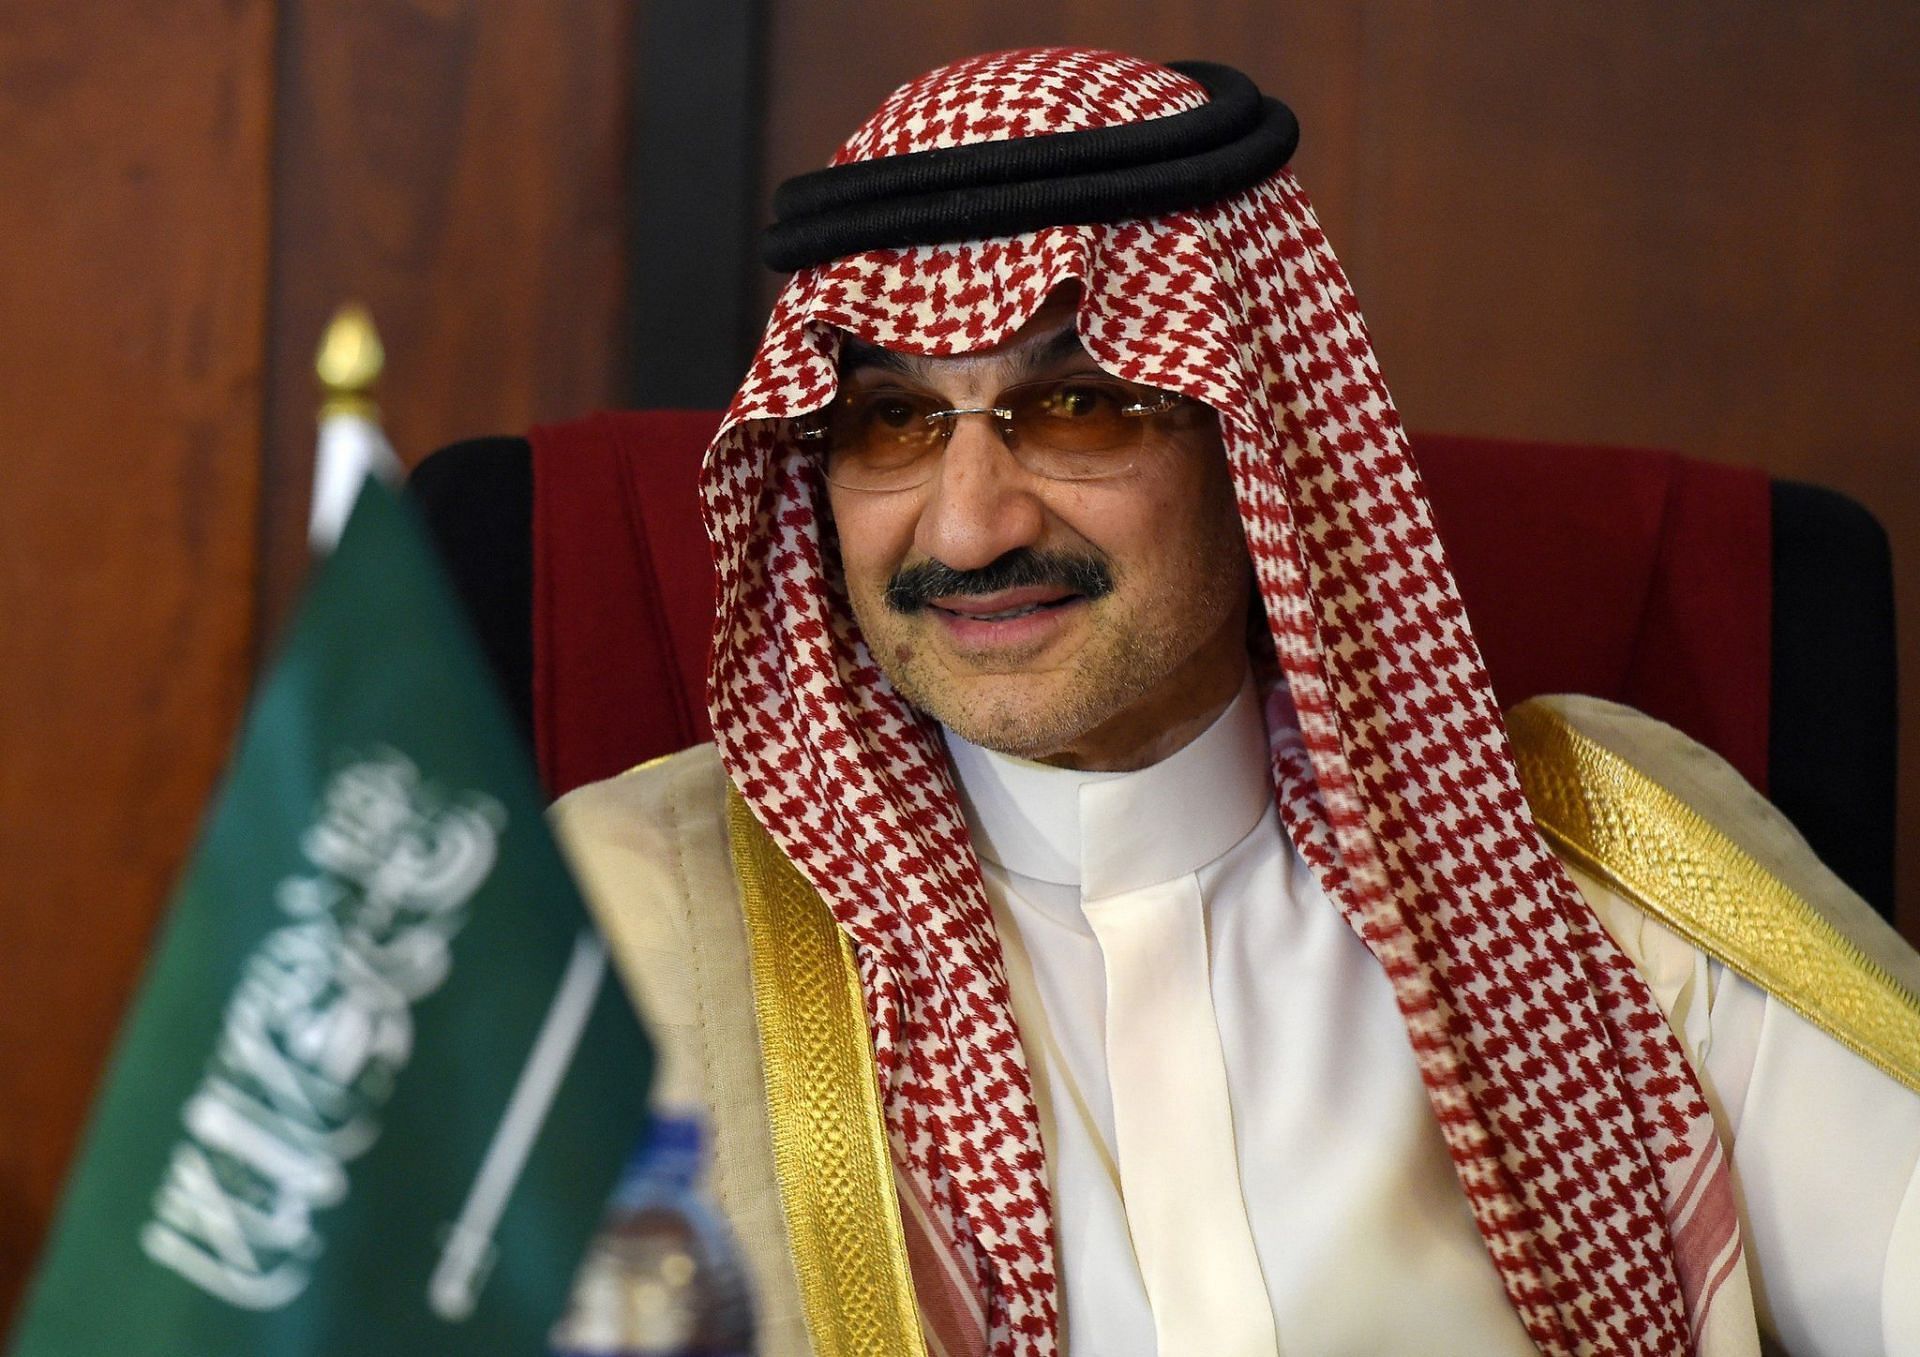 Saudi Prince Alwaleed Bin Talal is also rumored to be in the mix (Image courtesy: newyorktimes)